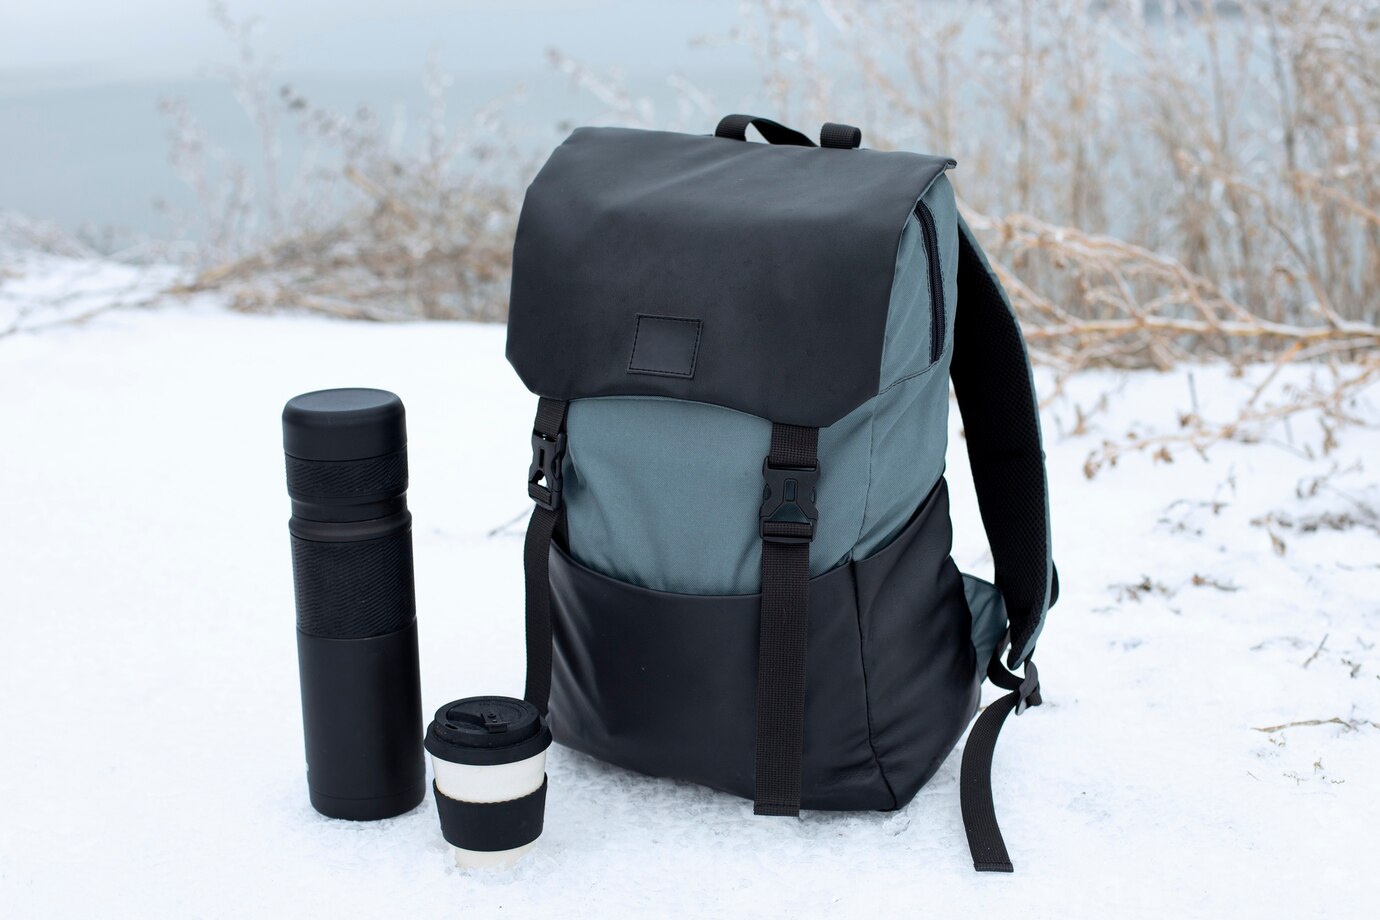 roadtrip-concept-with-backpack-flask_23-2149270128.jpg